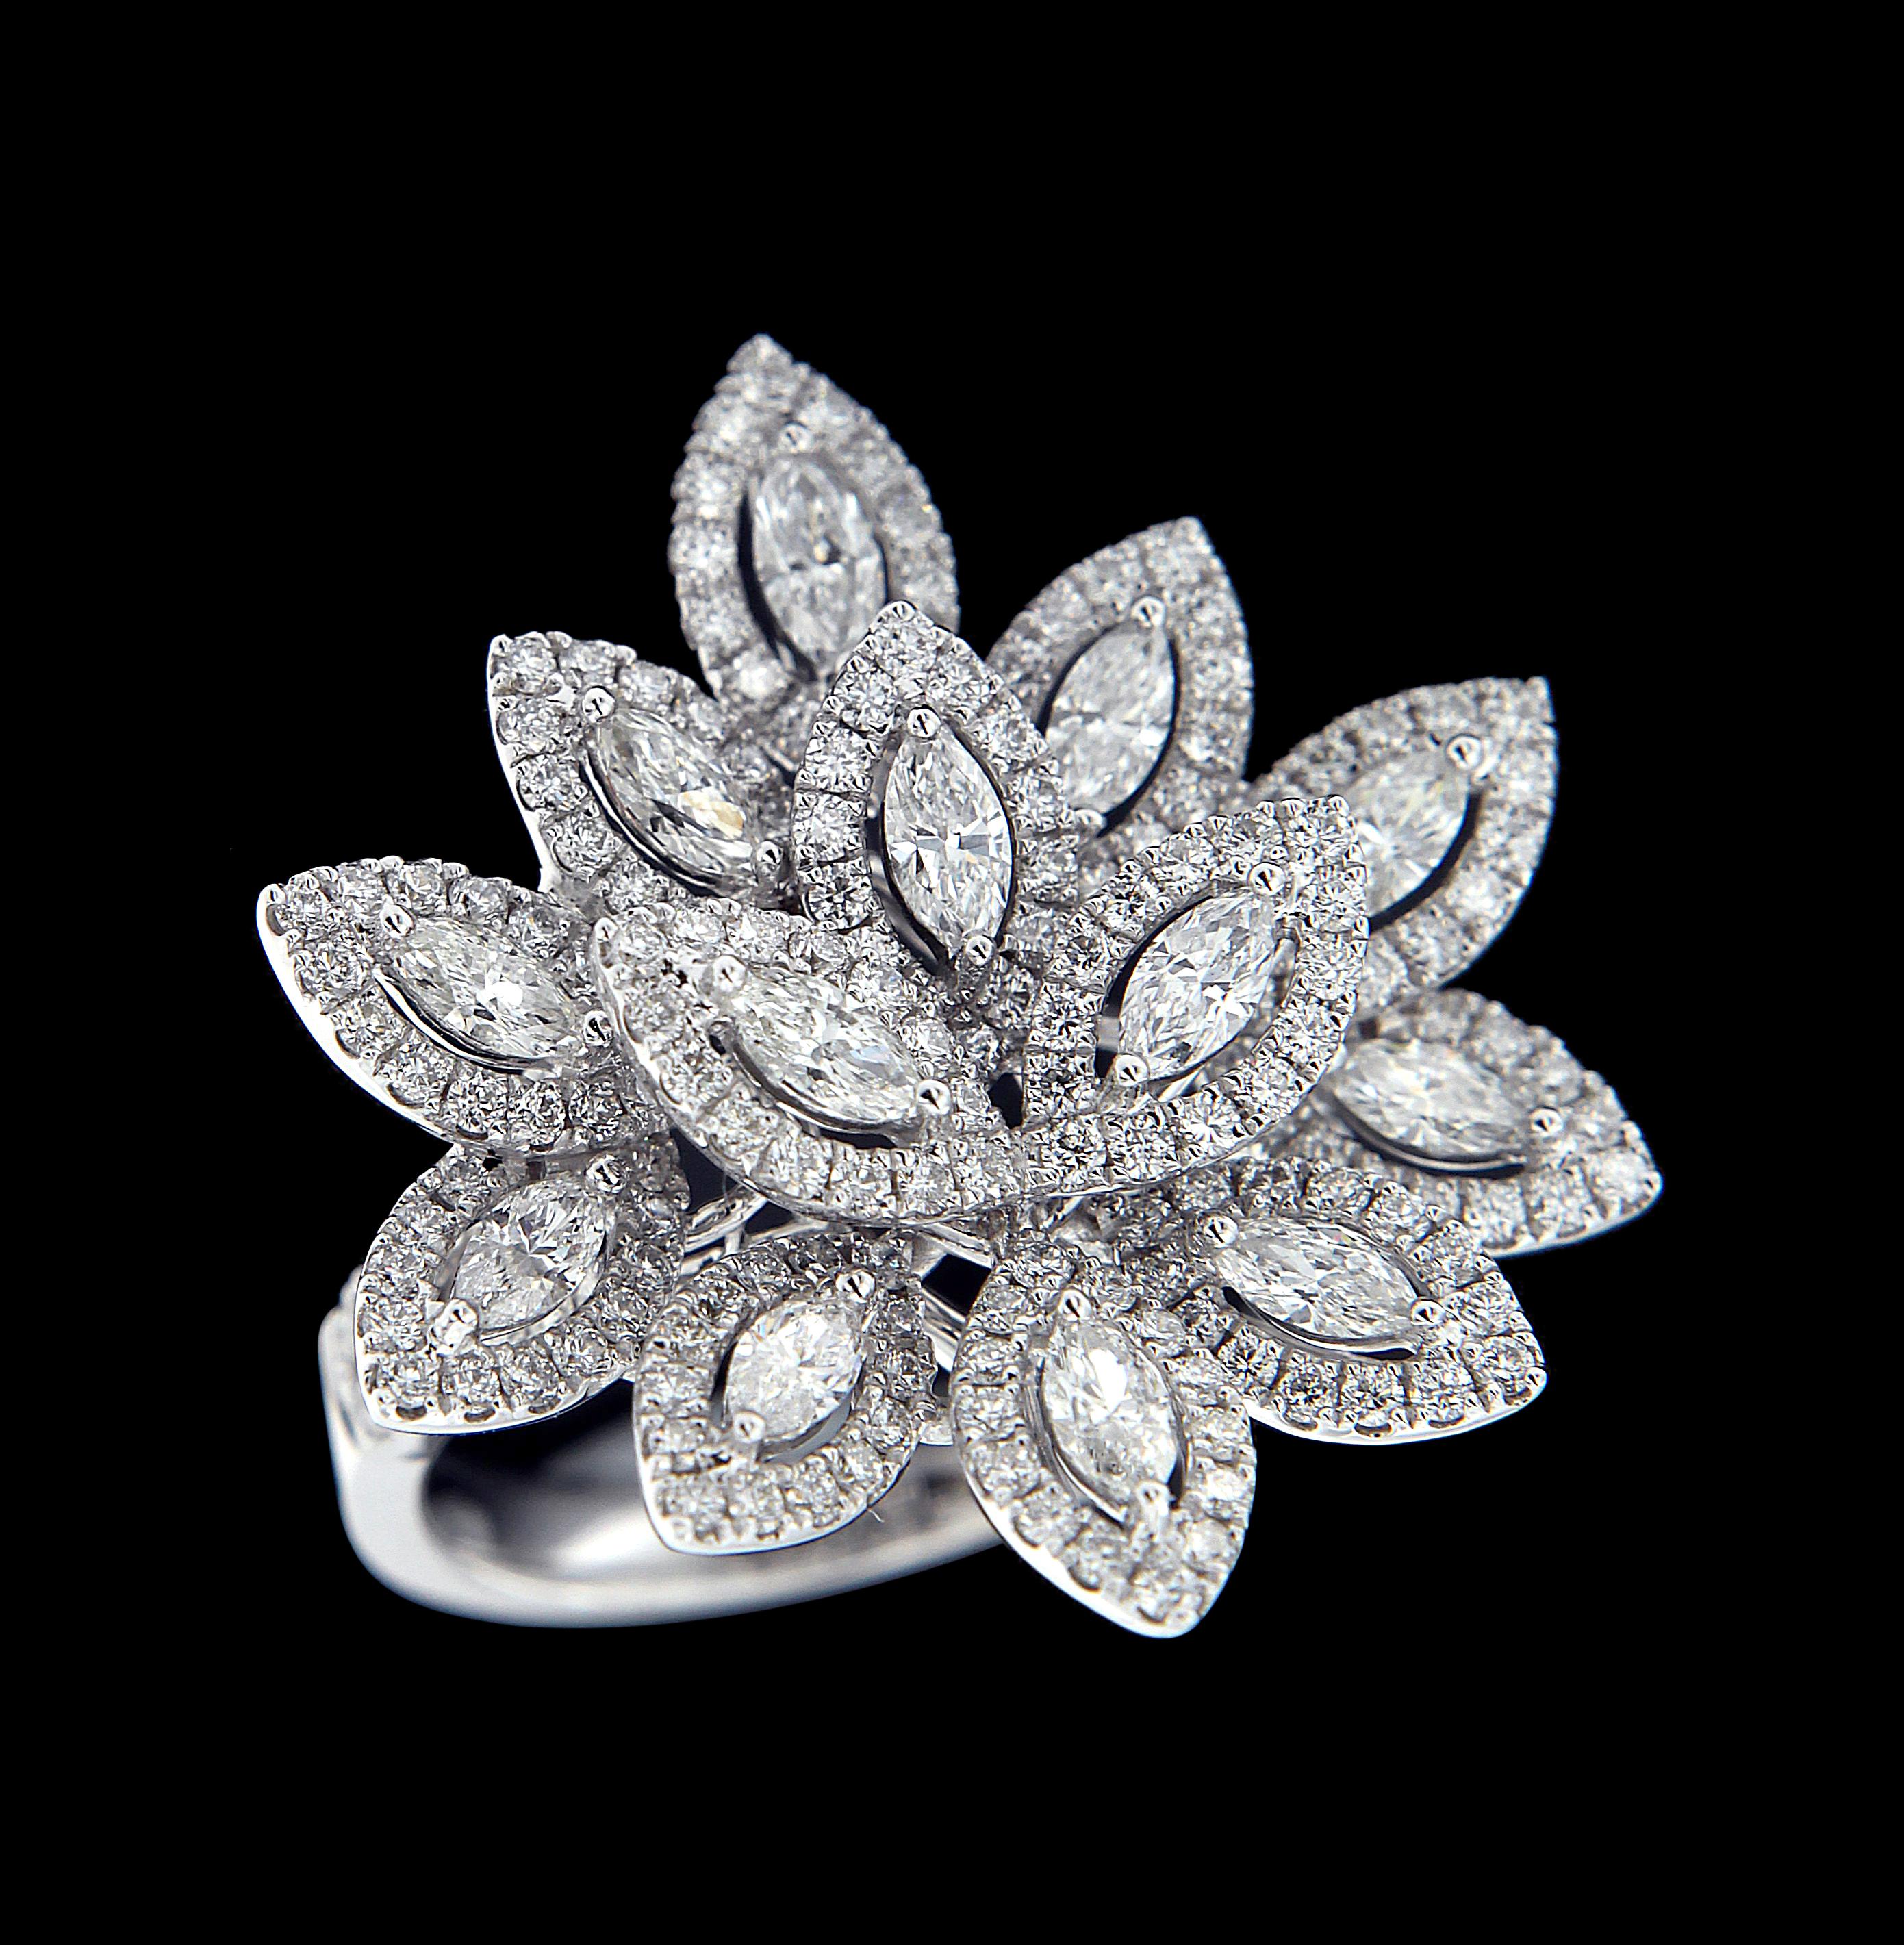 Flower 18 Karat White Gold and Diamond Cocktail Ring.

Diamonds of approximately 2.922 carats and mounted on 18 karats white gold ring. 
The ring weighs approximately 10.466 grams.

Please note: The charges specified do not include any shipment,